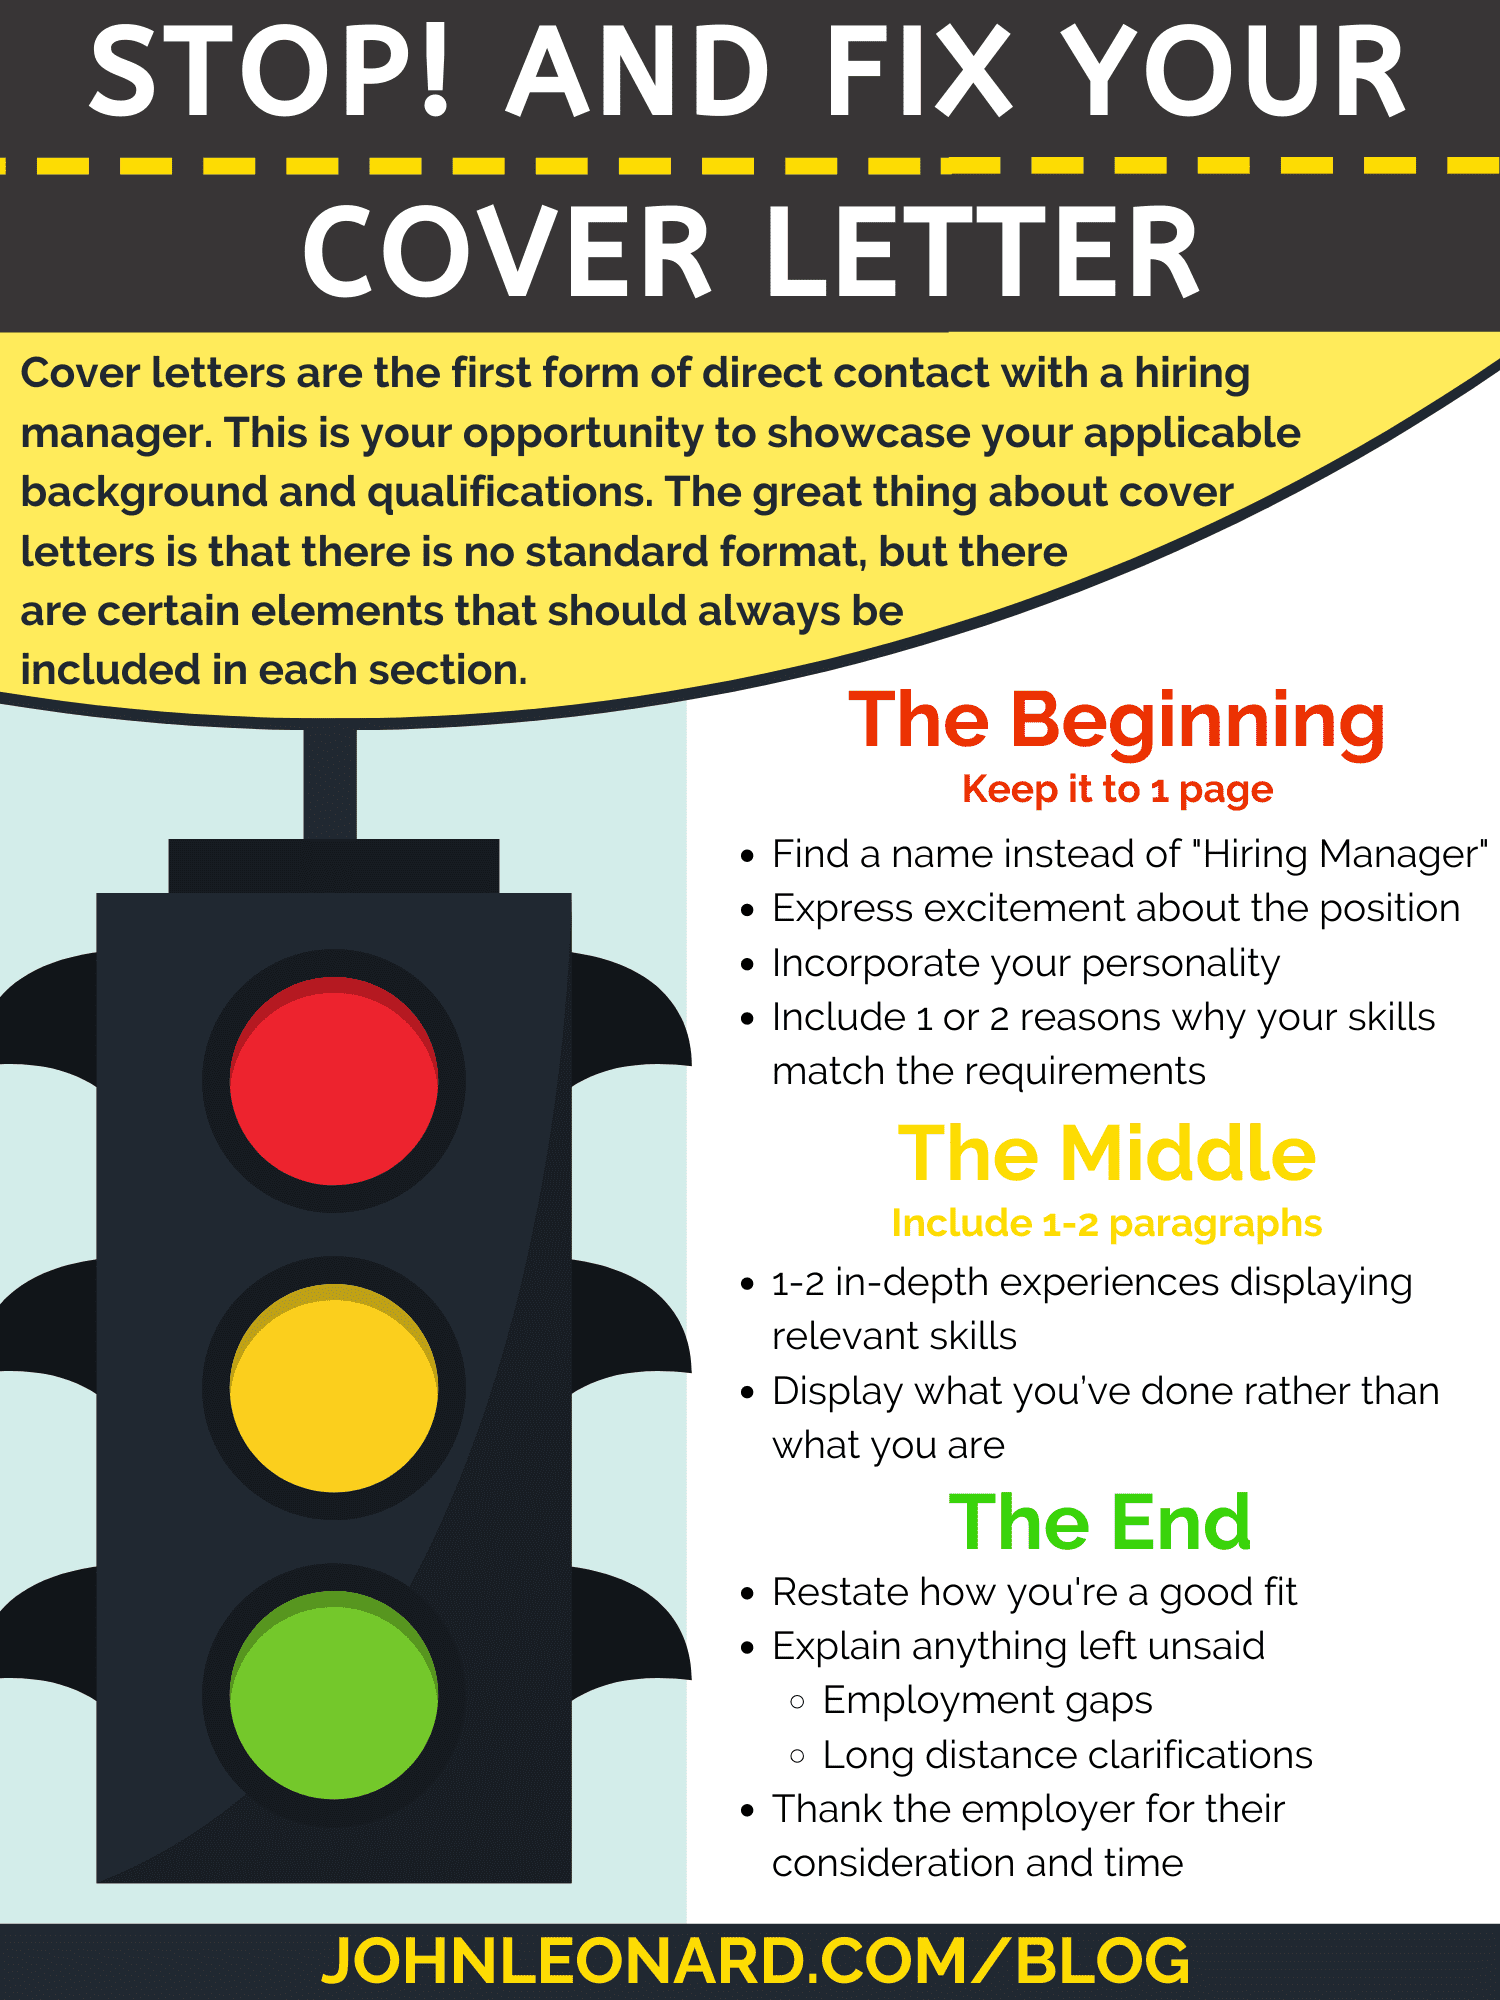 Cover Letter Infographic-1